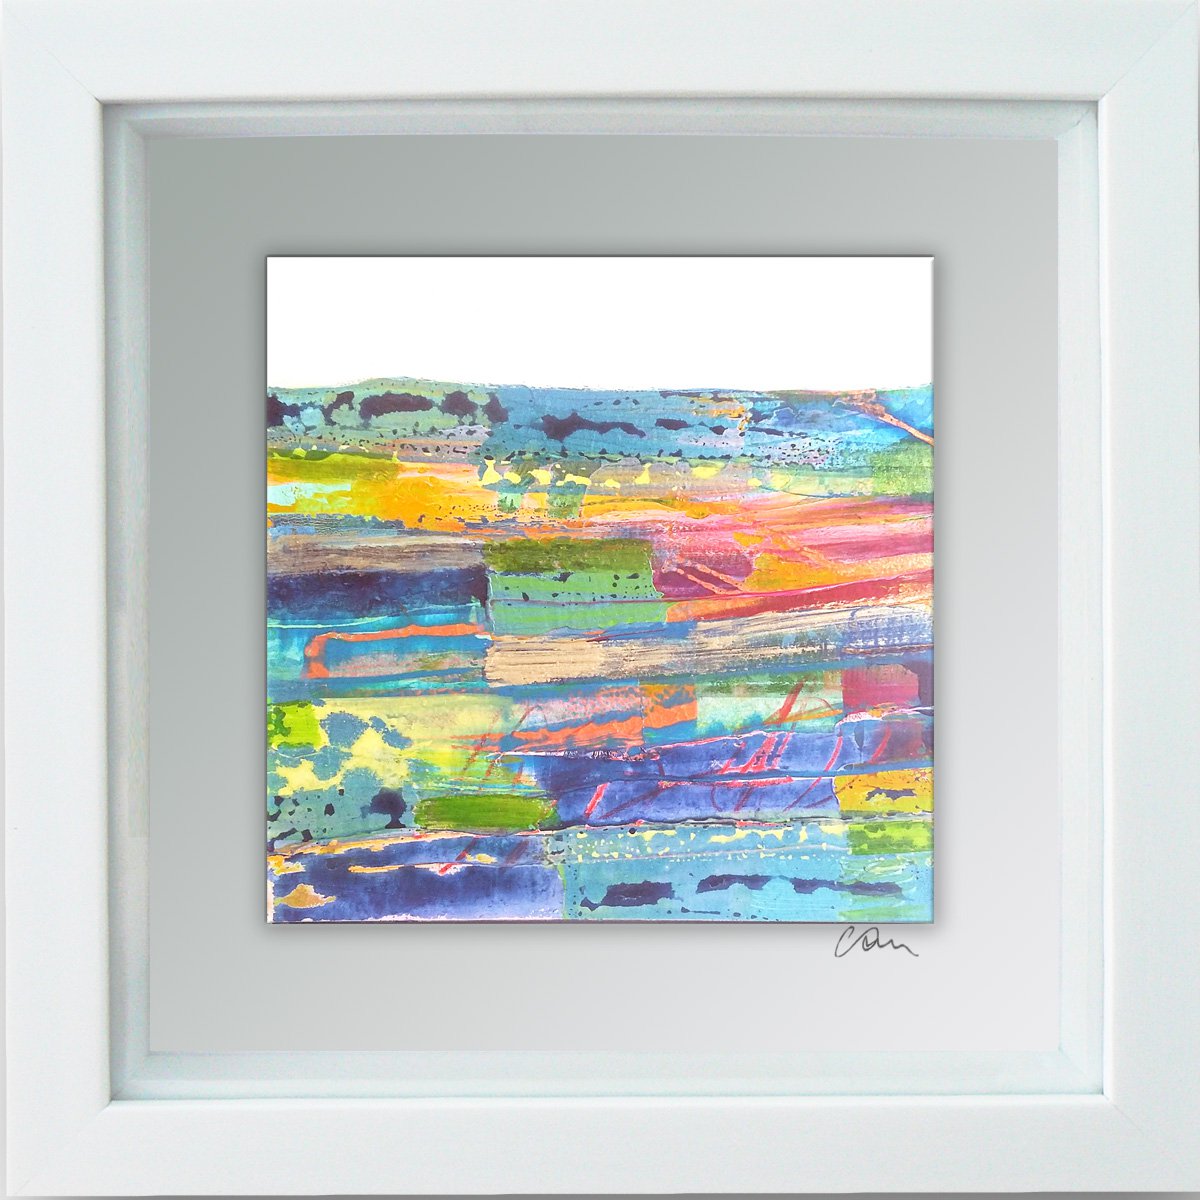 Framed ready to hang original abstract - patchwork landscape #2 by Carolynne Coulson